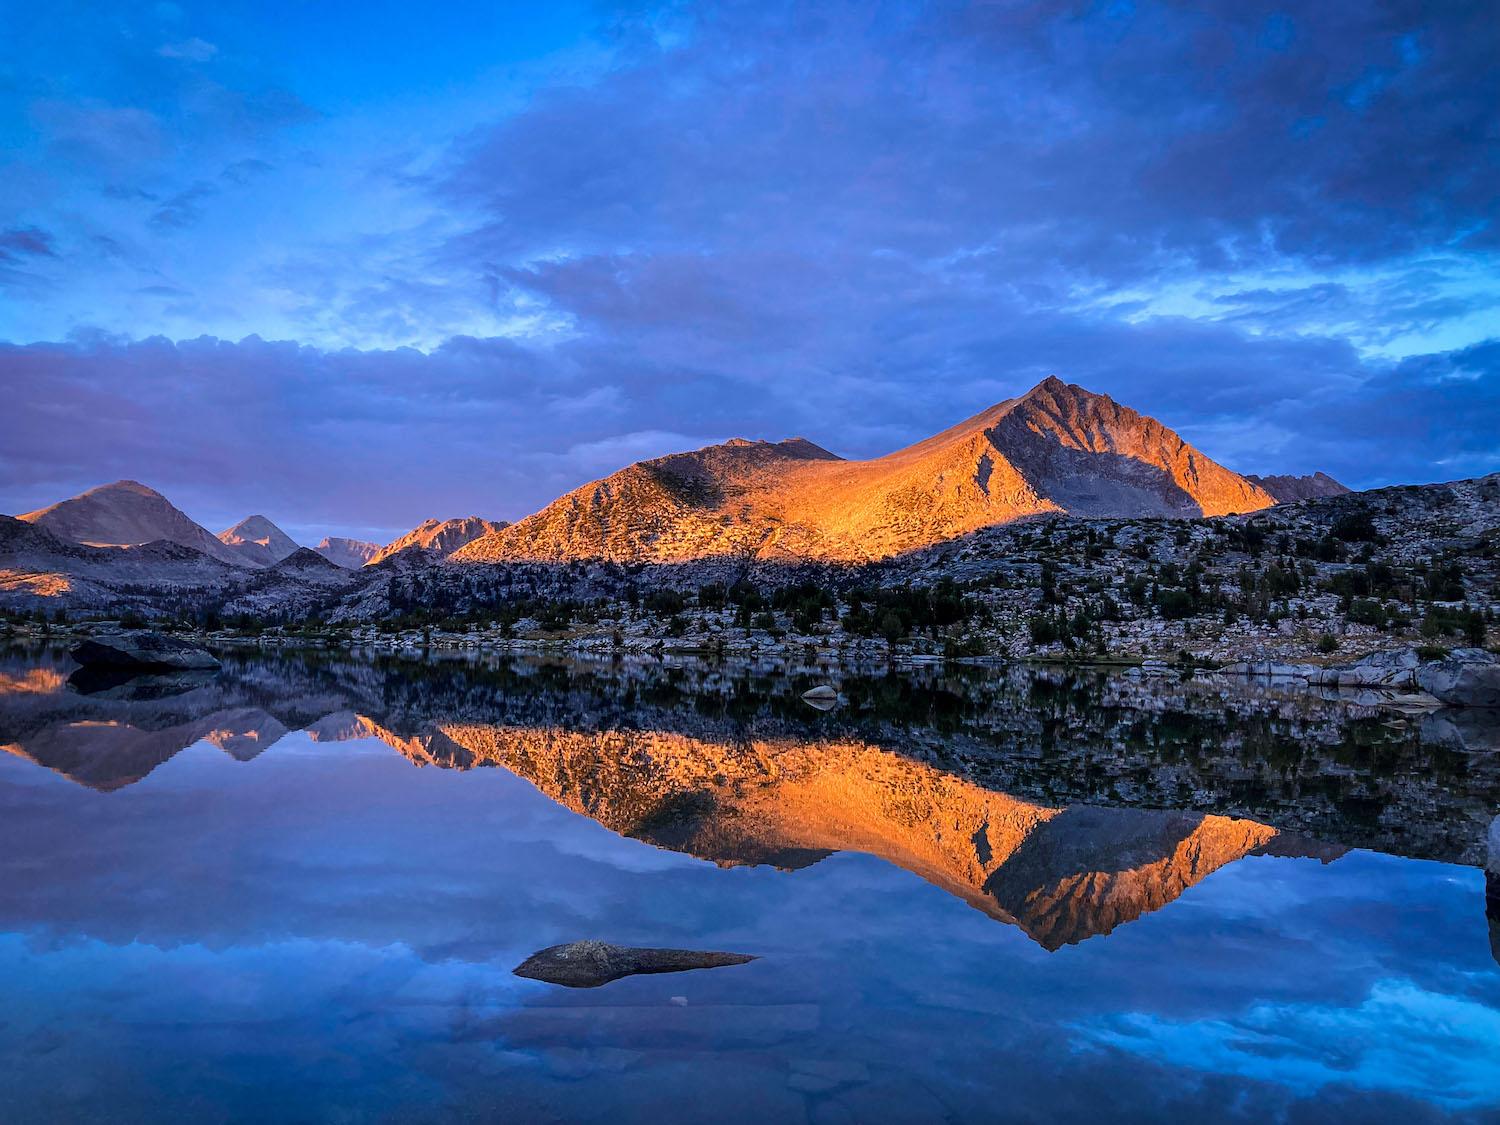 Sunset at Marie Lake along the John Muir Trail - Pacific Crest Trail